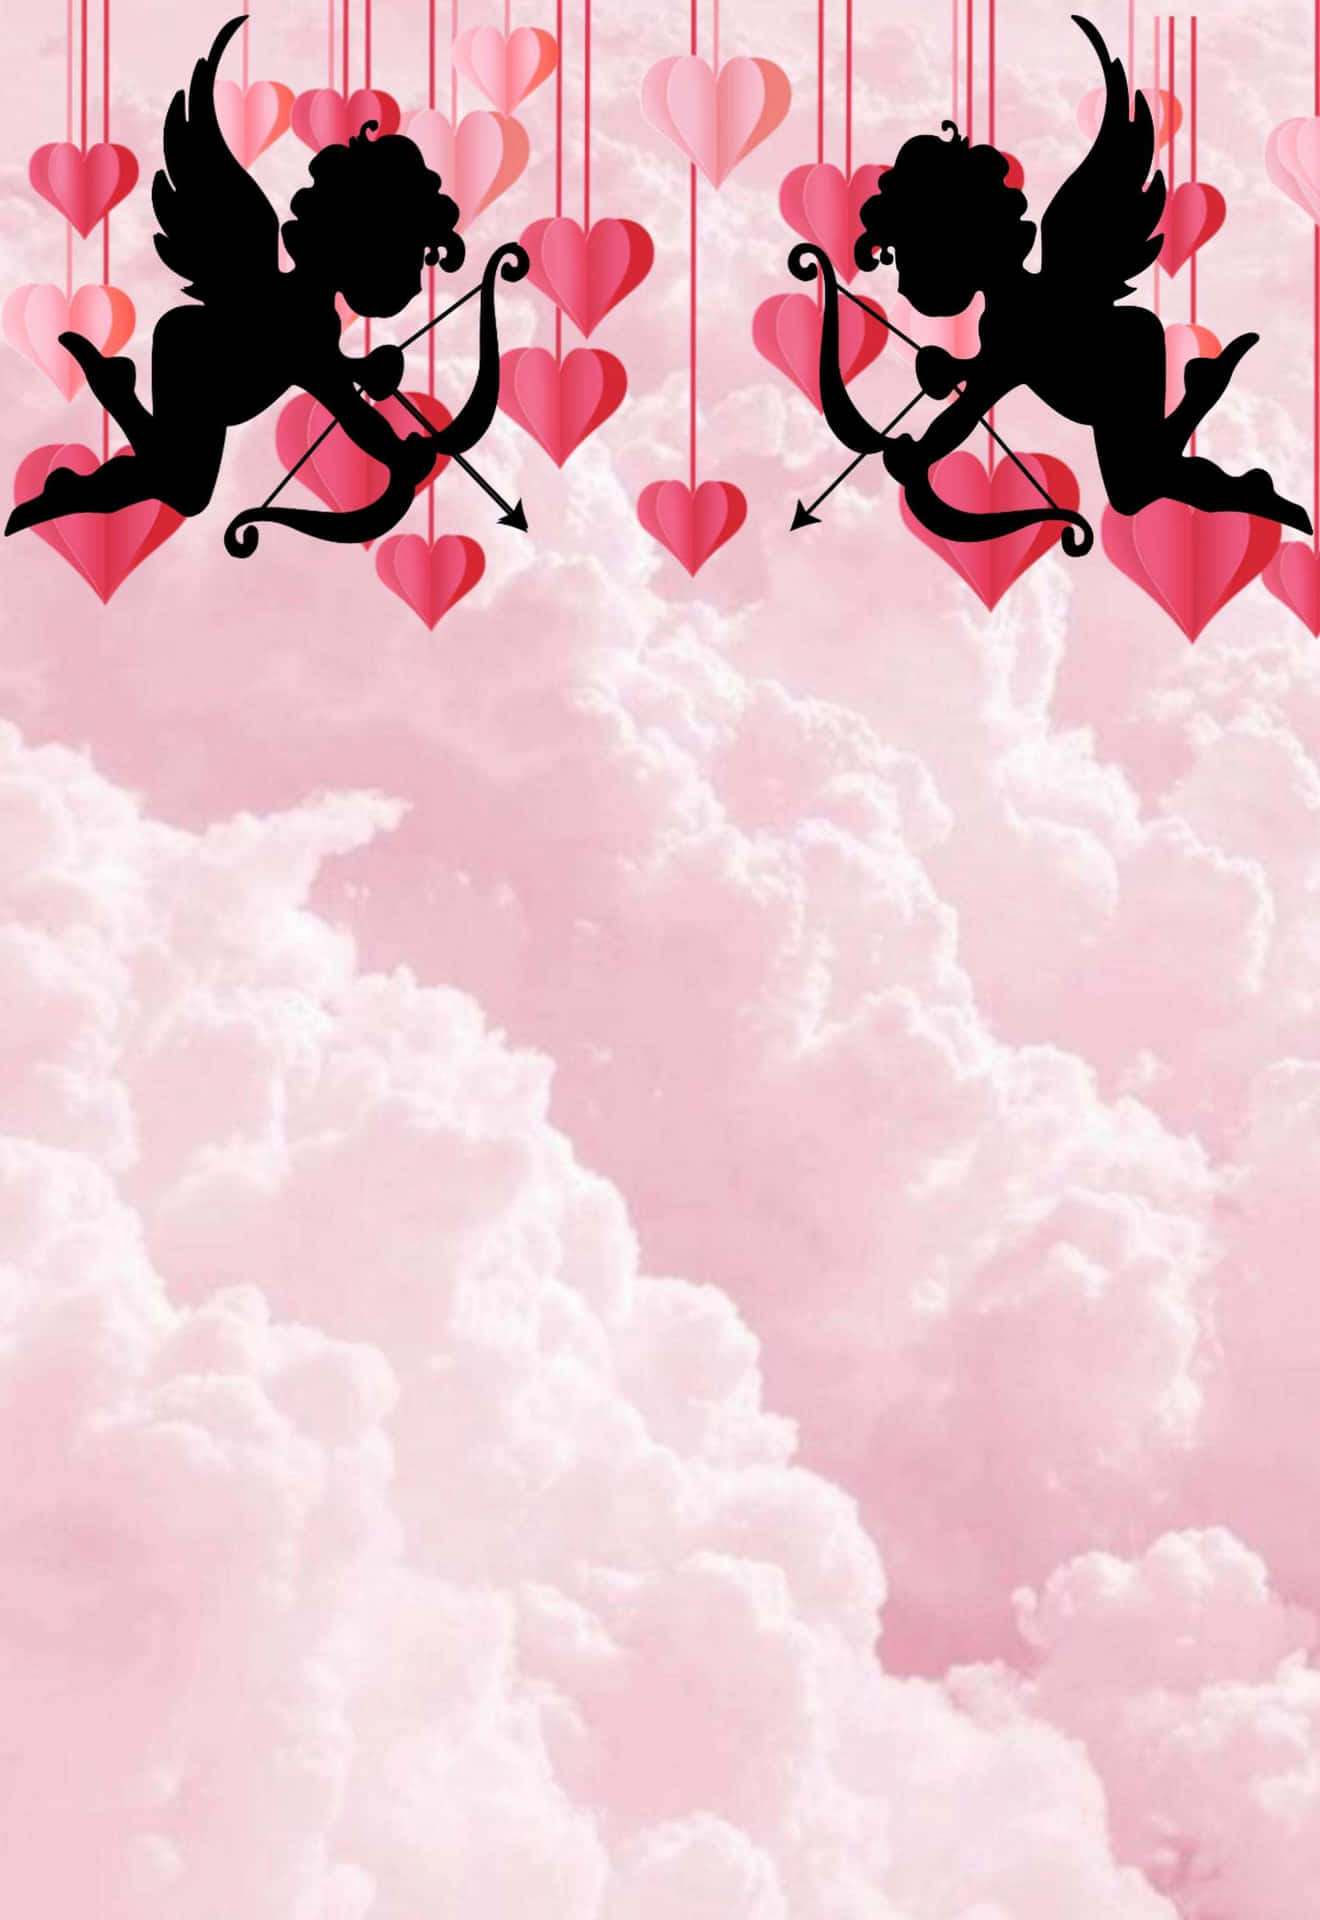 Cupid Silhouettes Clouds Hearts Background Wallpaper